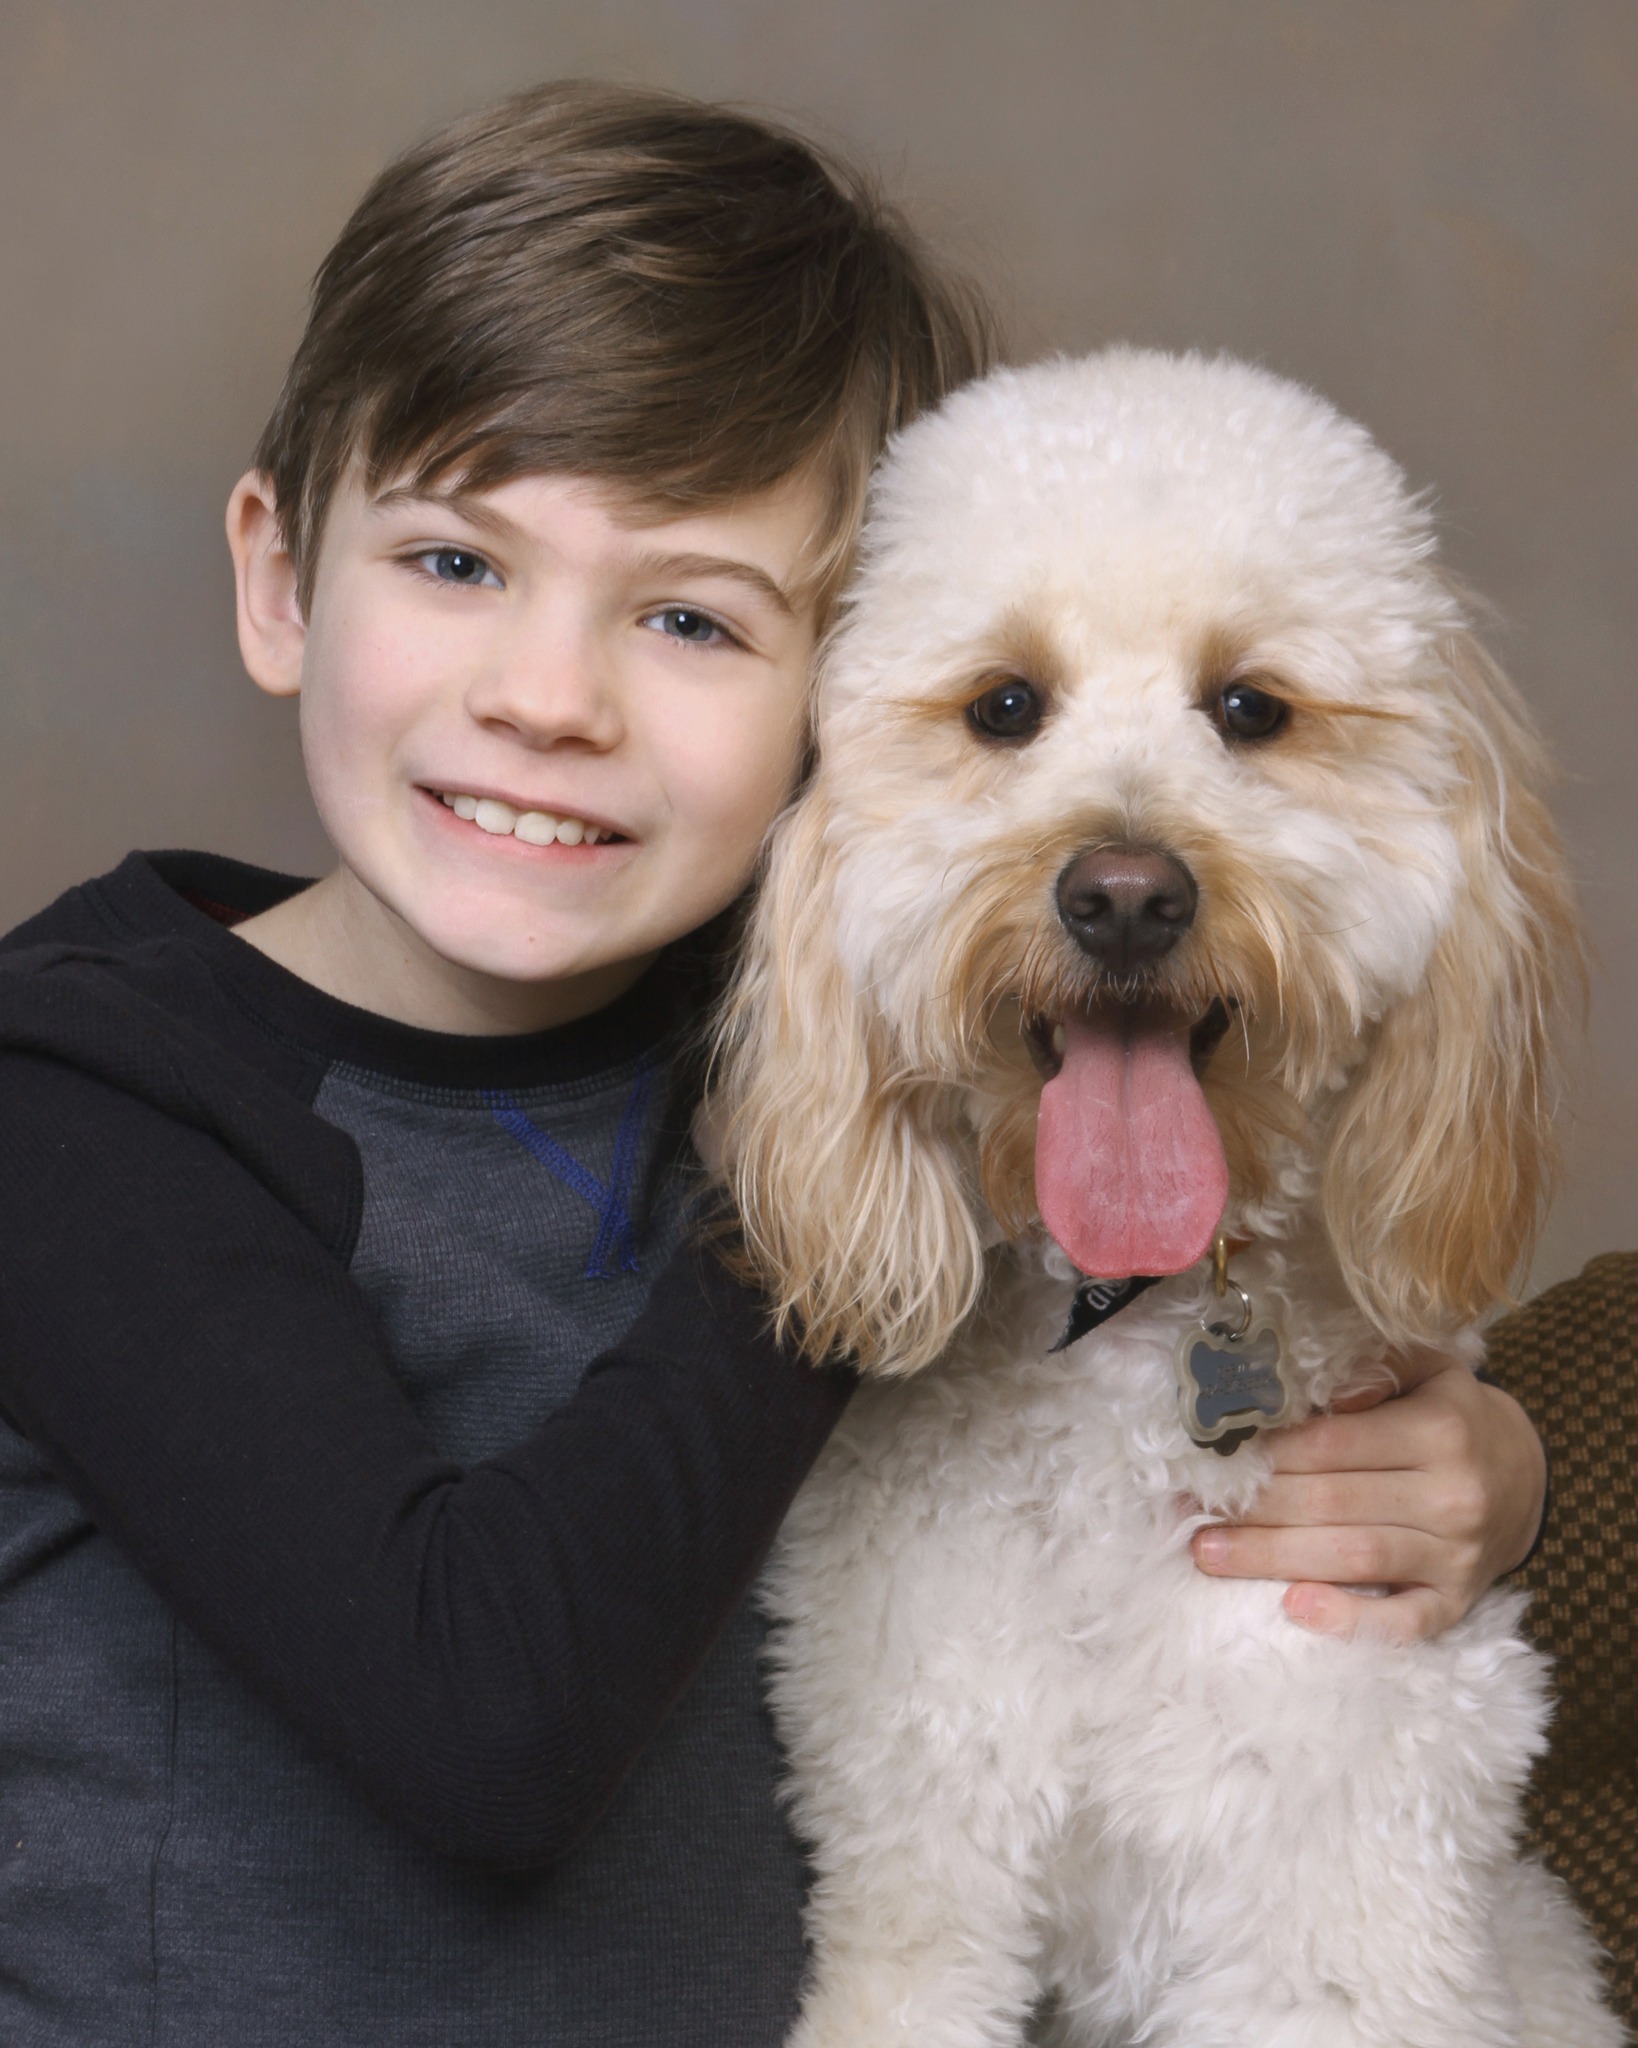 Young boy with brunette hair, smiling with his arms wrapped around his poodle mix